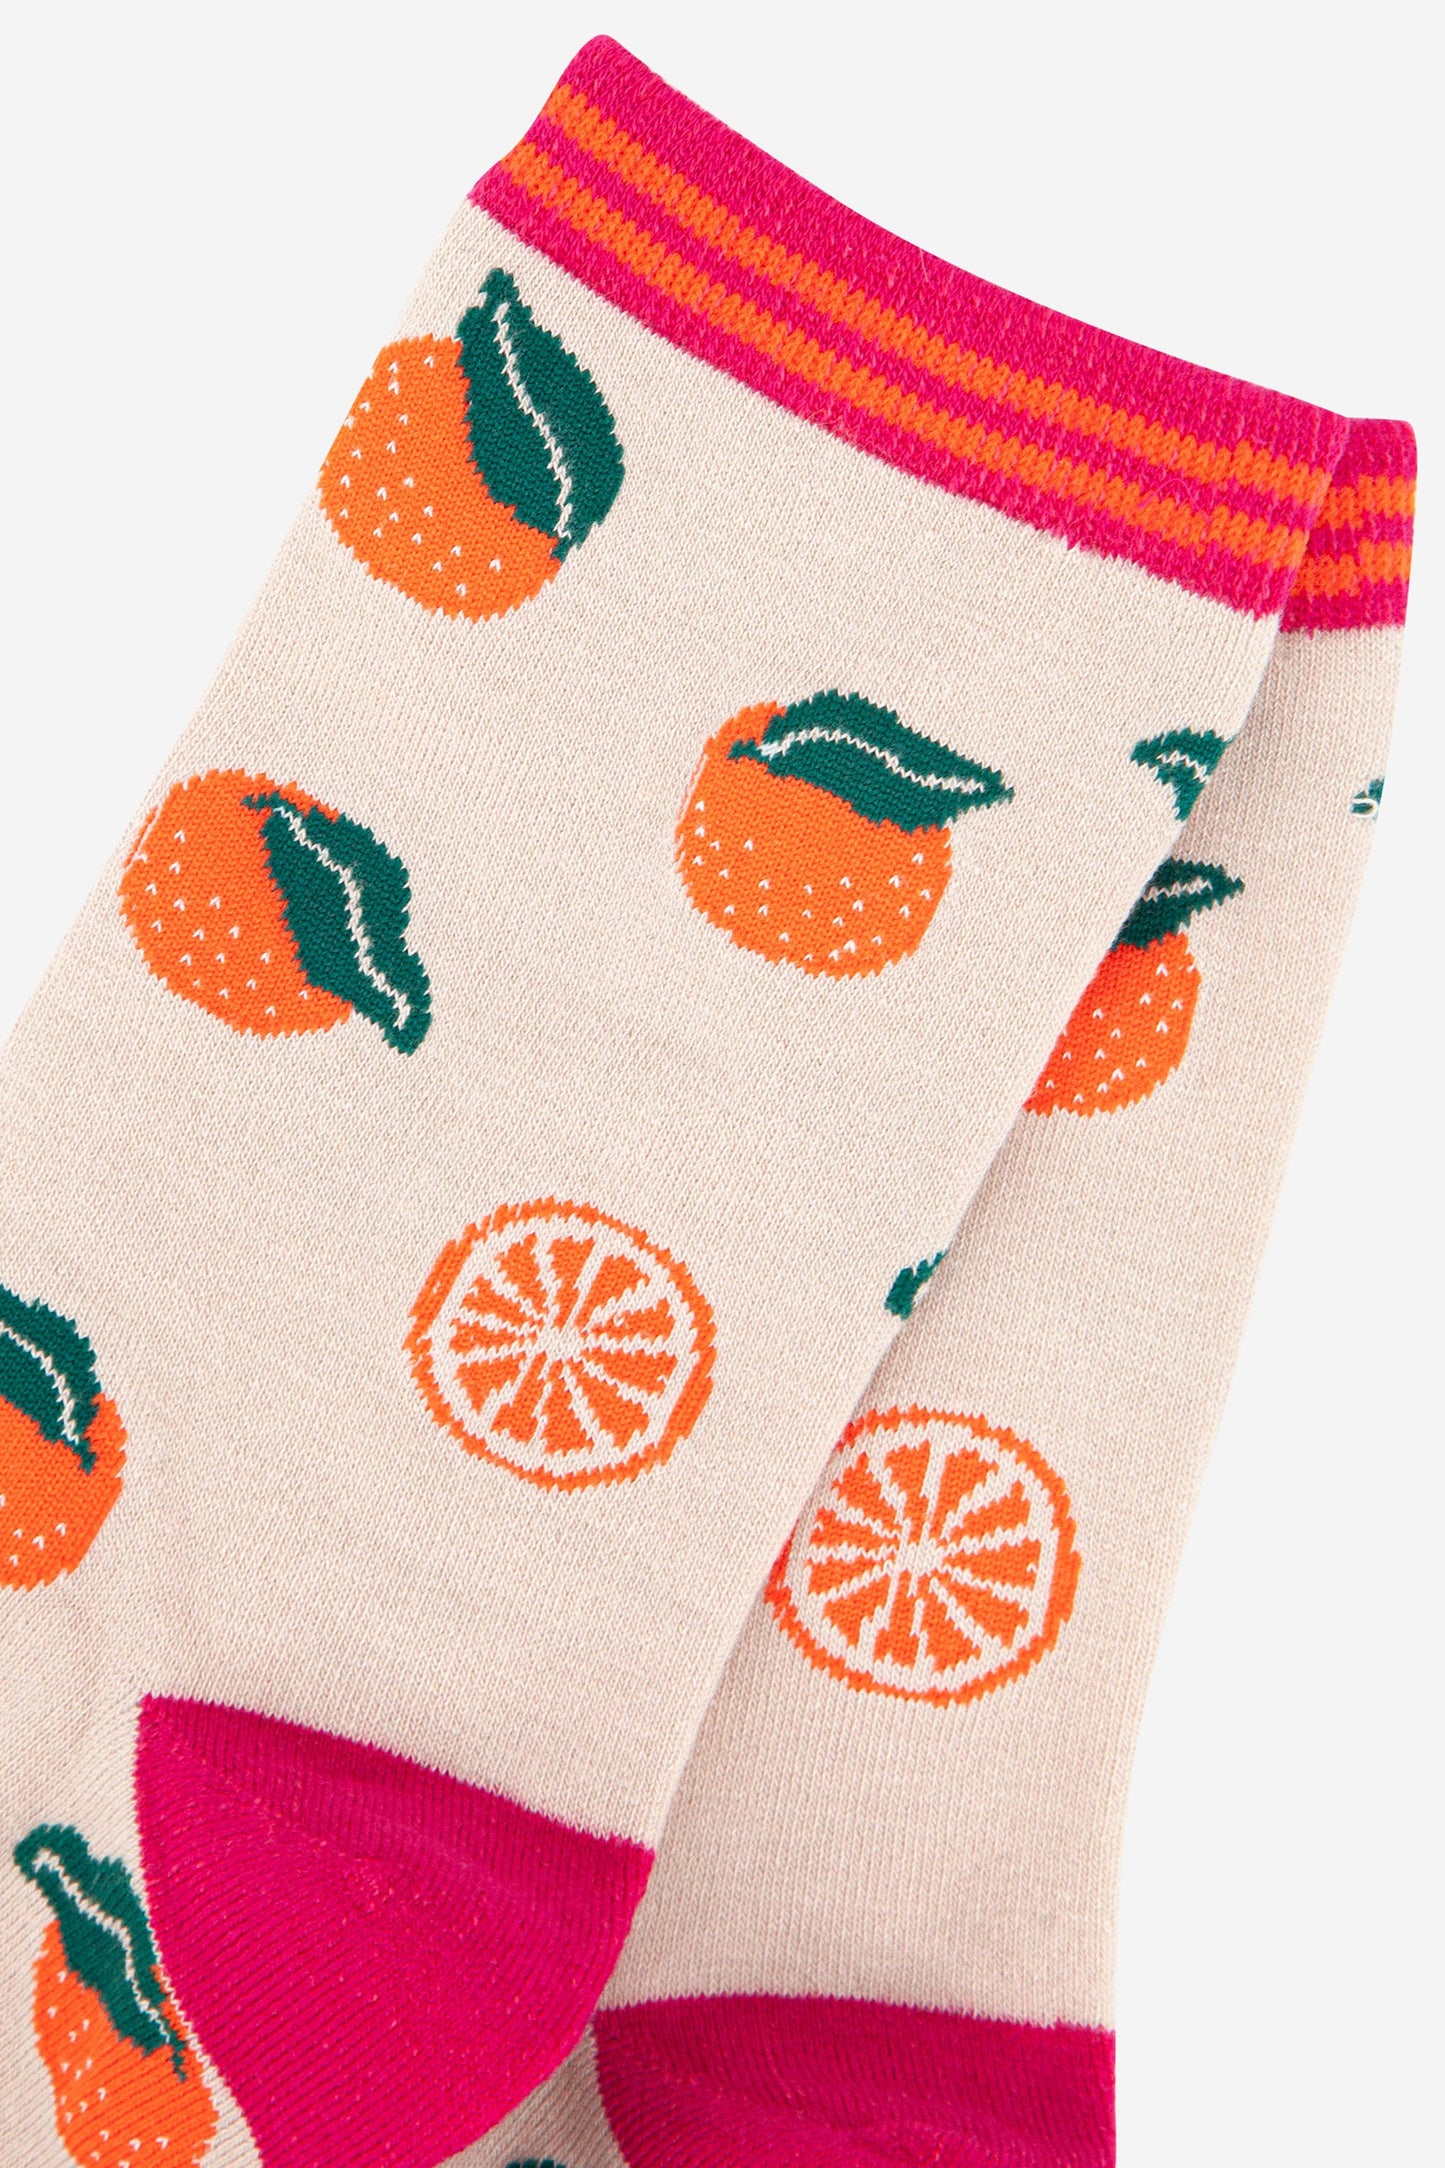 close up of the orange fruit pattern on the socks and a close up of the striped cuff